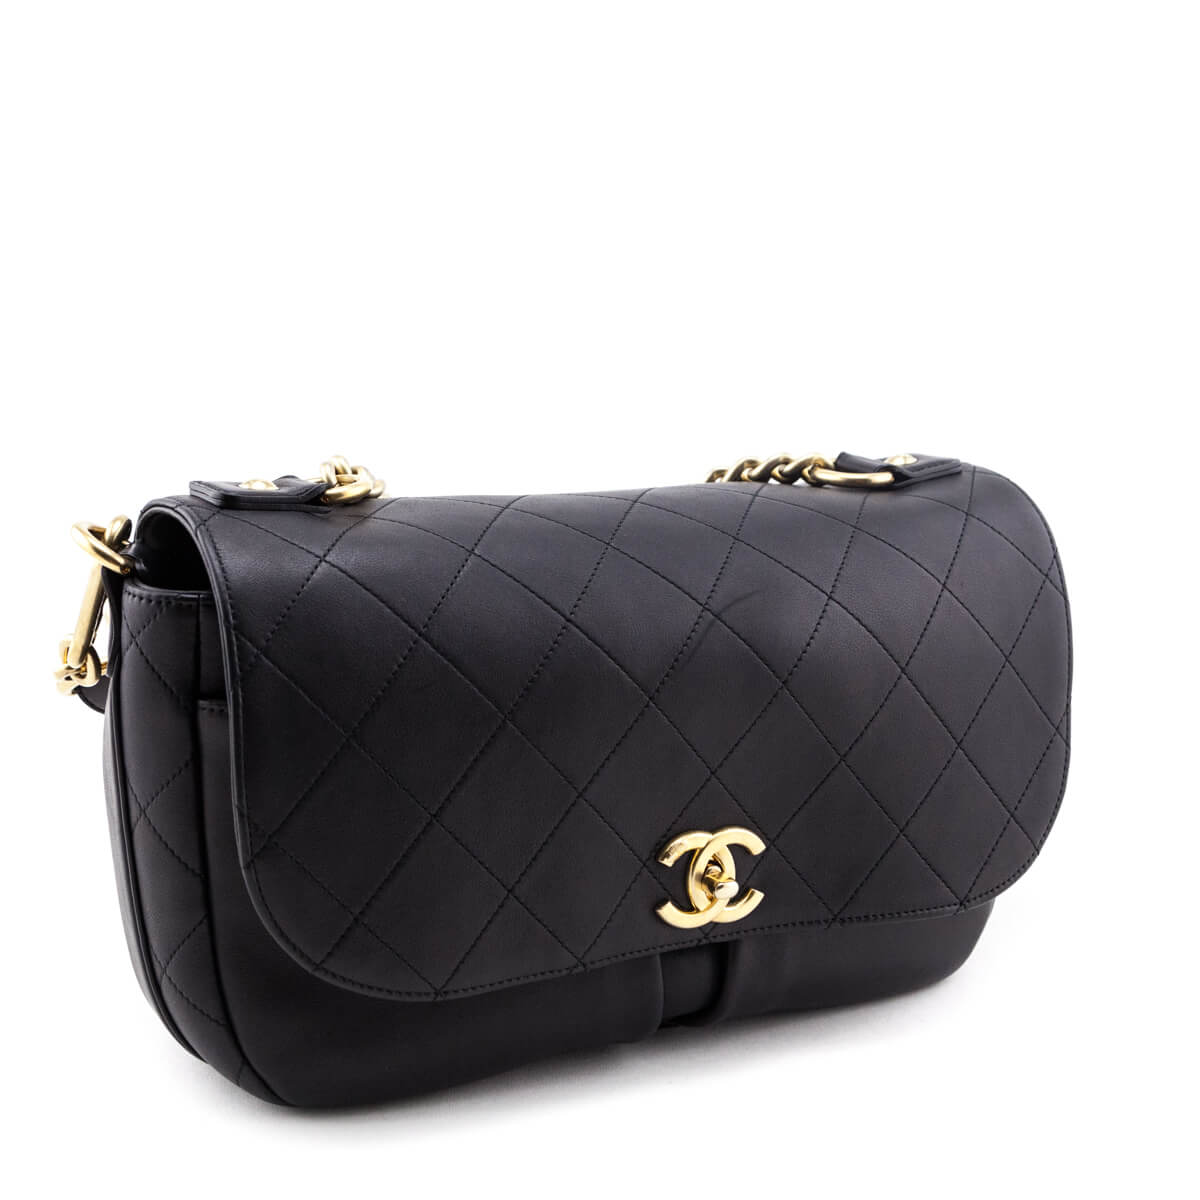 Chanel Black Stitched Calfskin Small Paris in Rome Messenger Bag